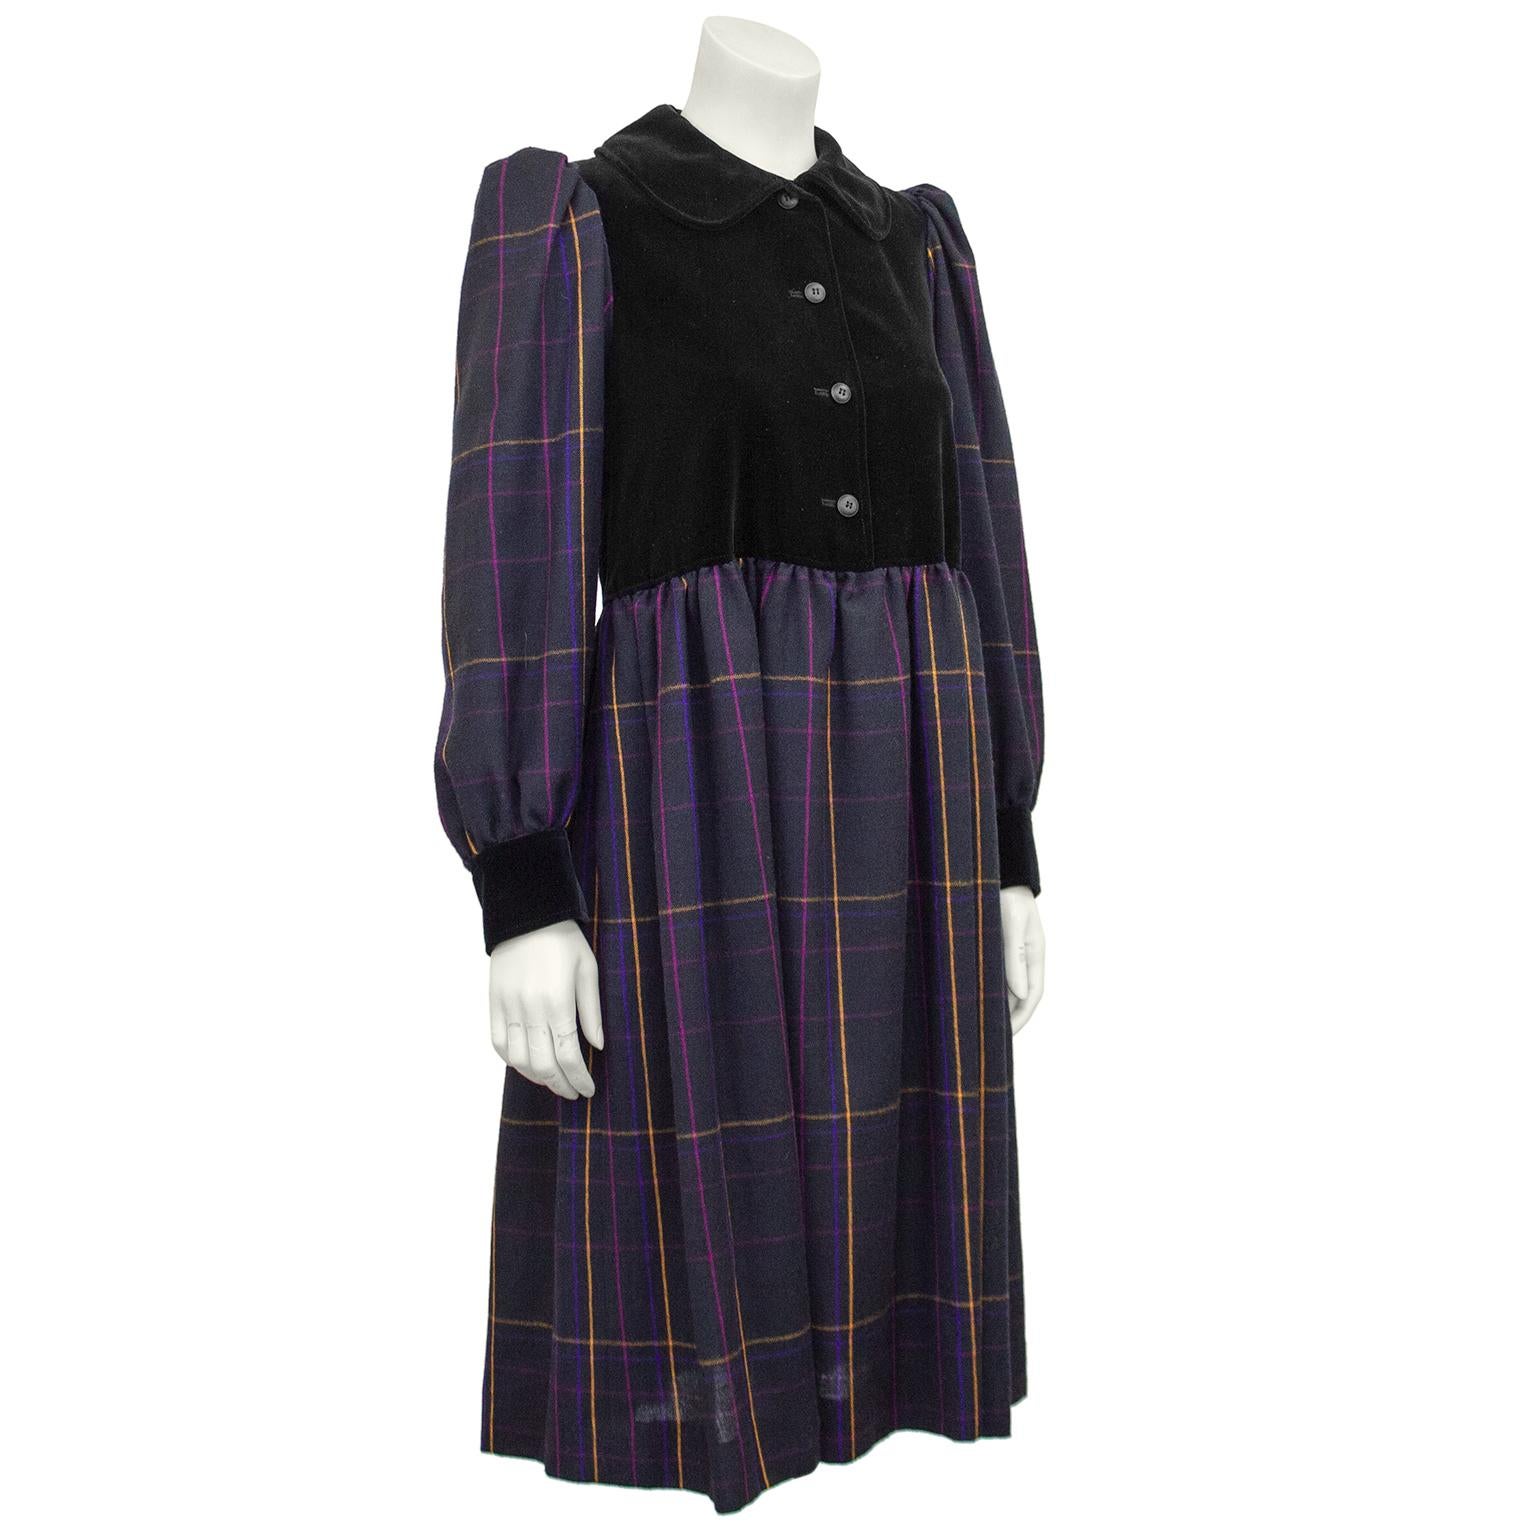 1980s Yves Saint Laurent Rive Gauche peasant style shirt dress. Black velvet bodice with a large peter pan collar and black buttons. Long bishop sleeves and skirt are charcoal grey and purple wool tartan with accents of pink and yellow. Black velvet